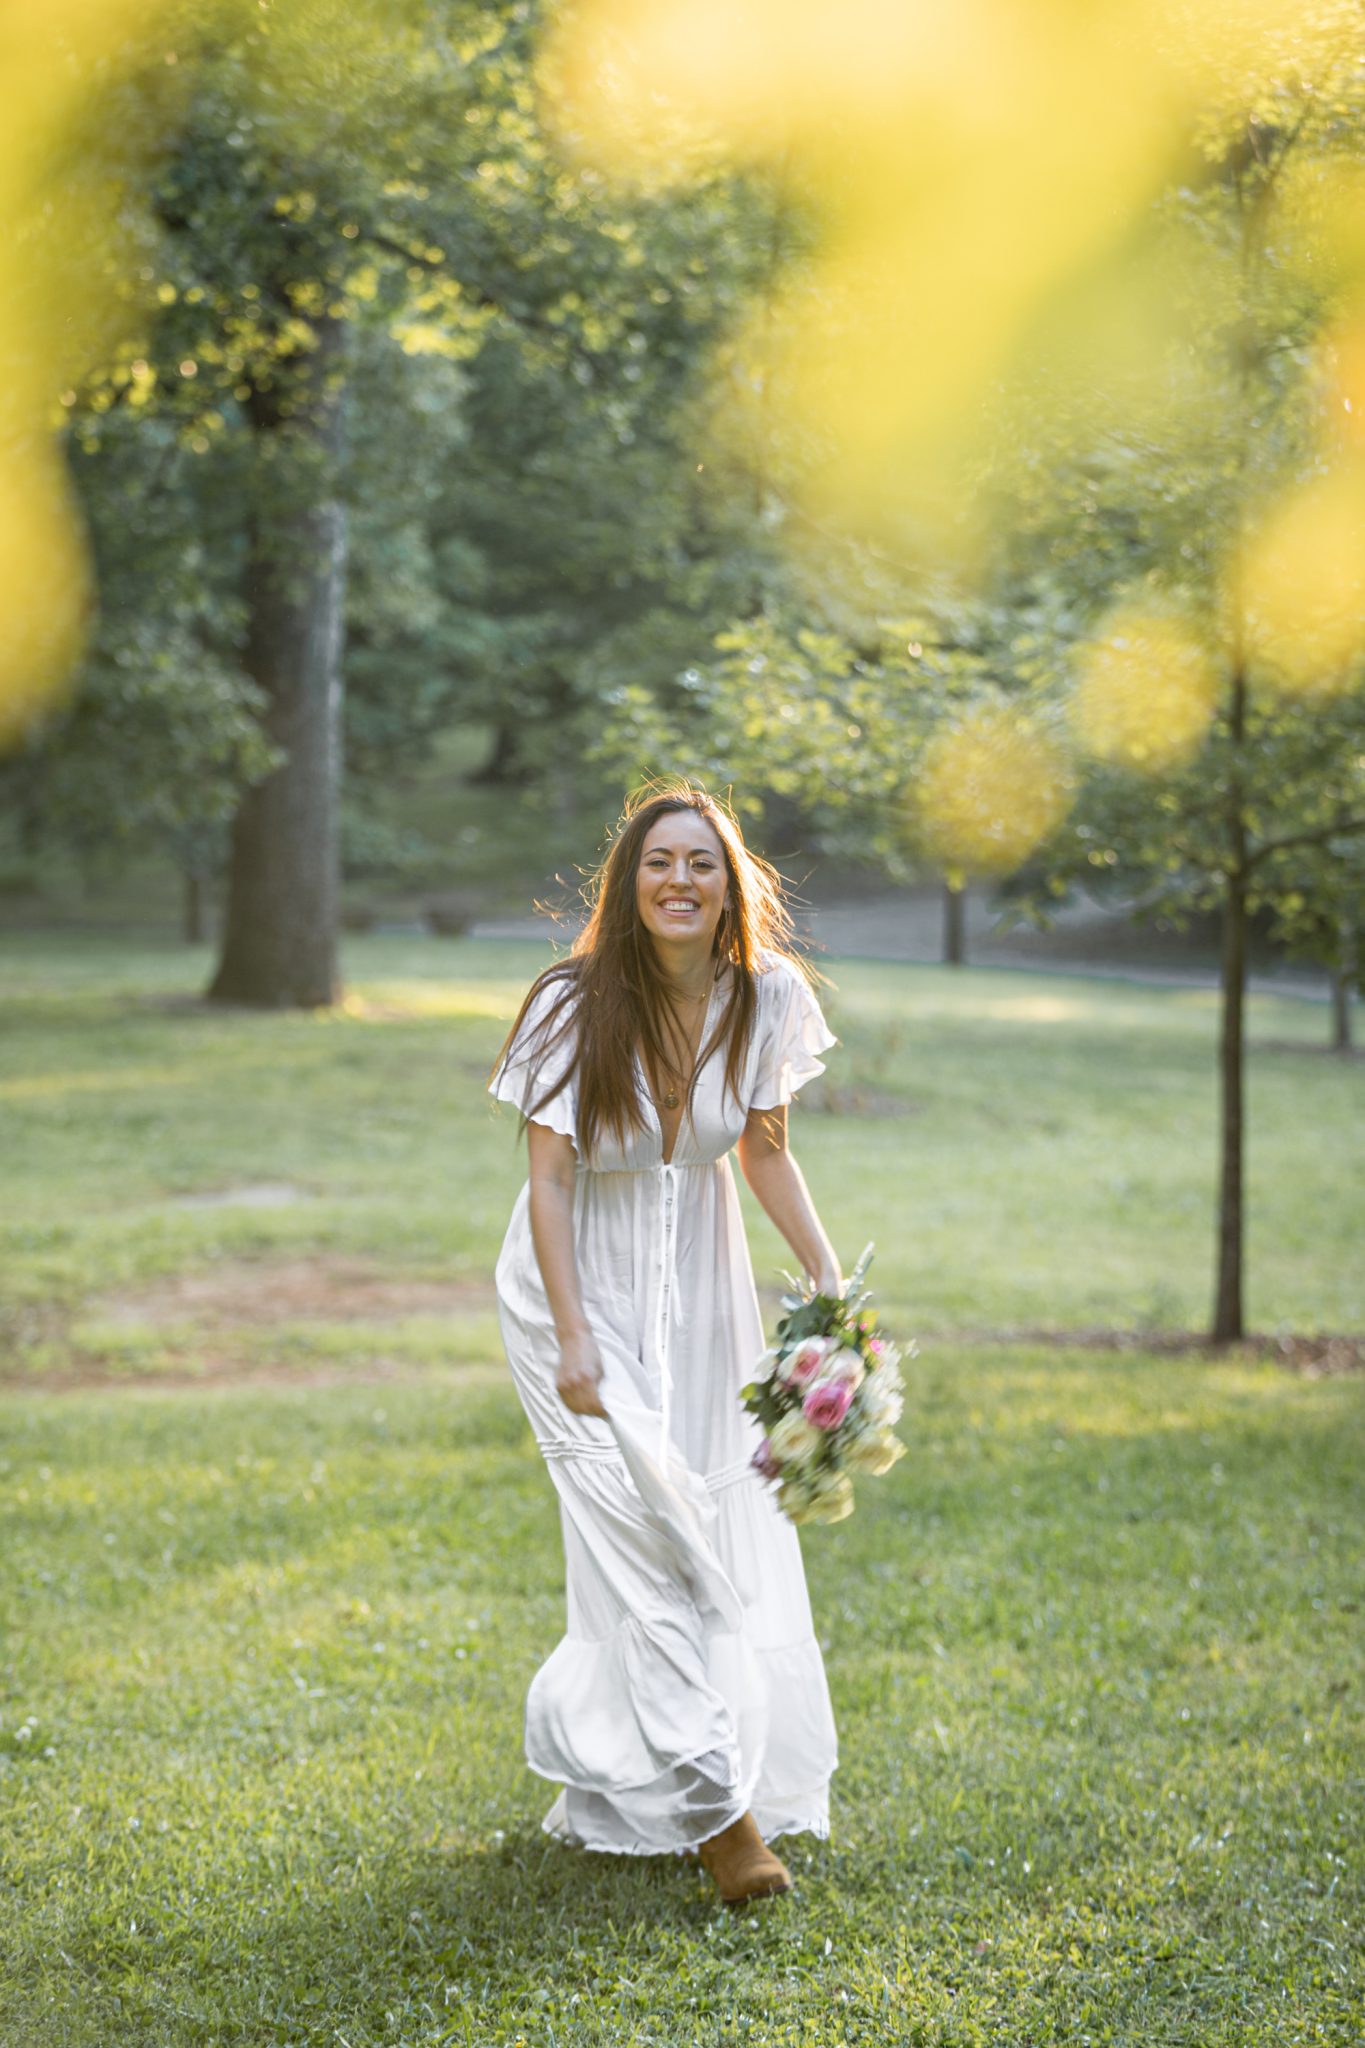 woman holding flowers in a park smiling 